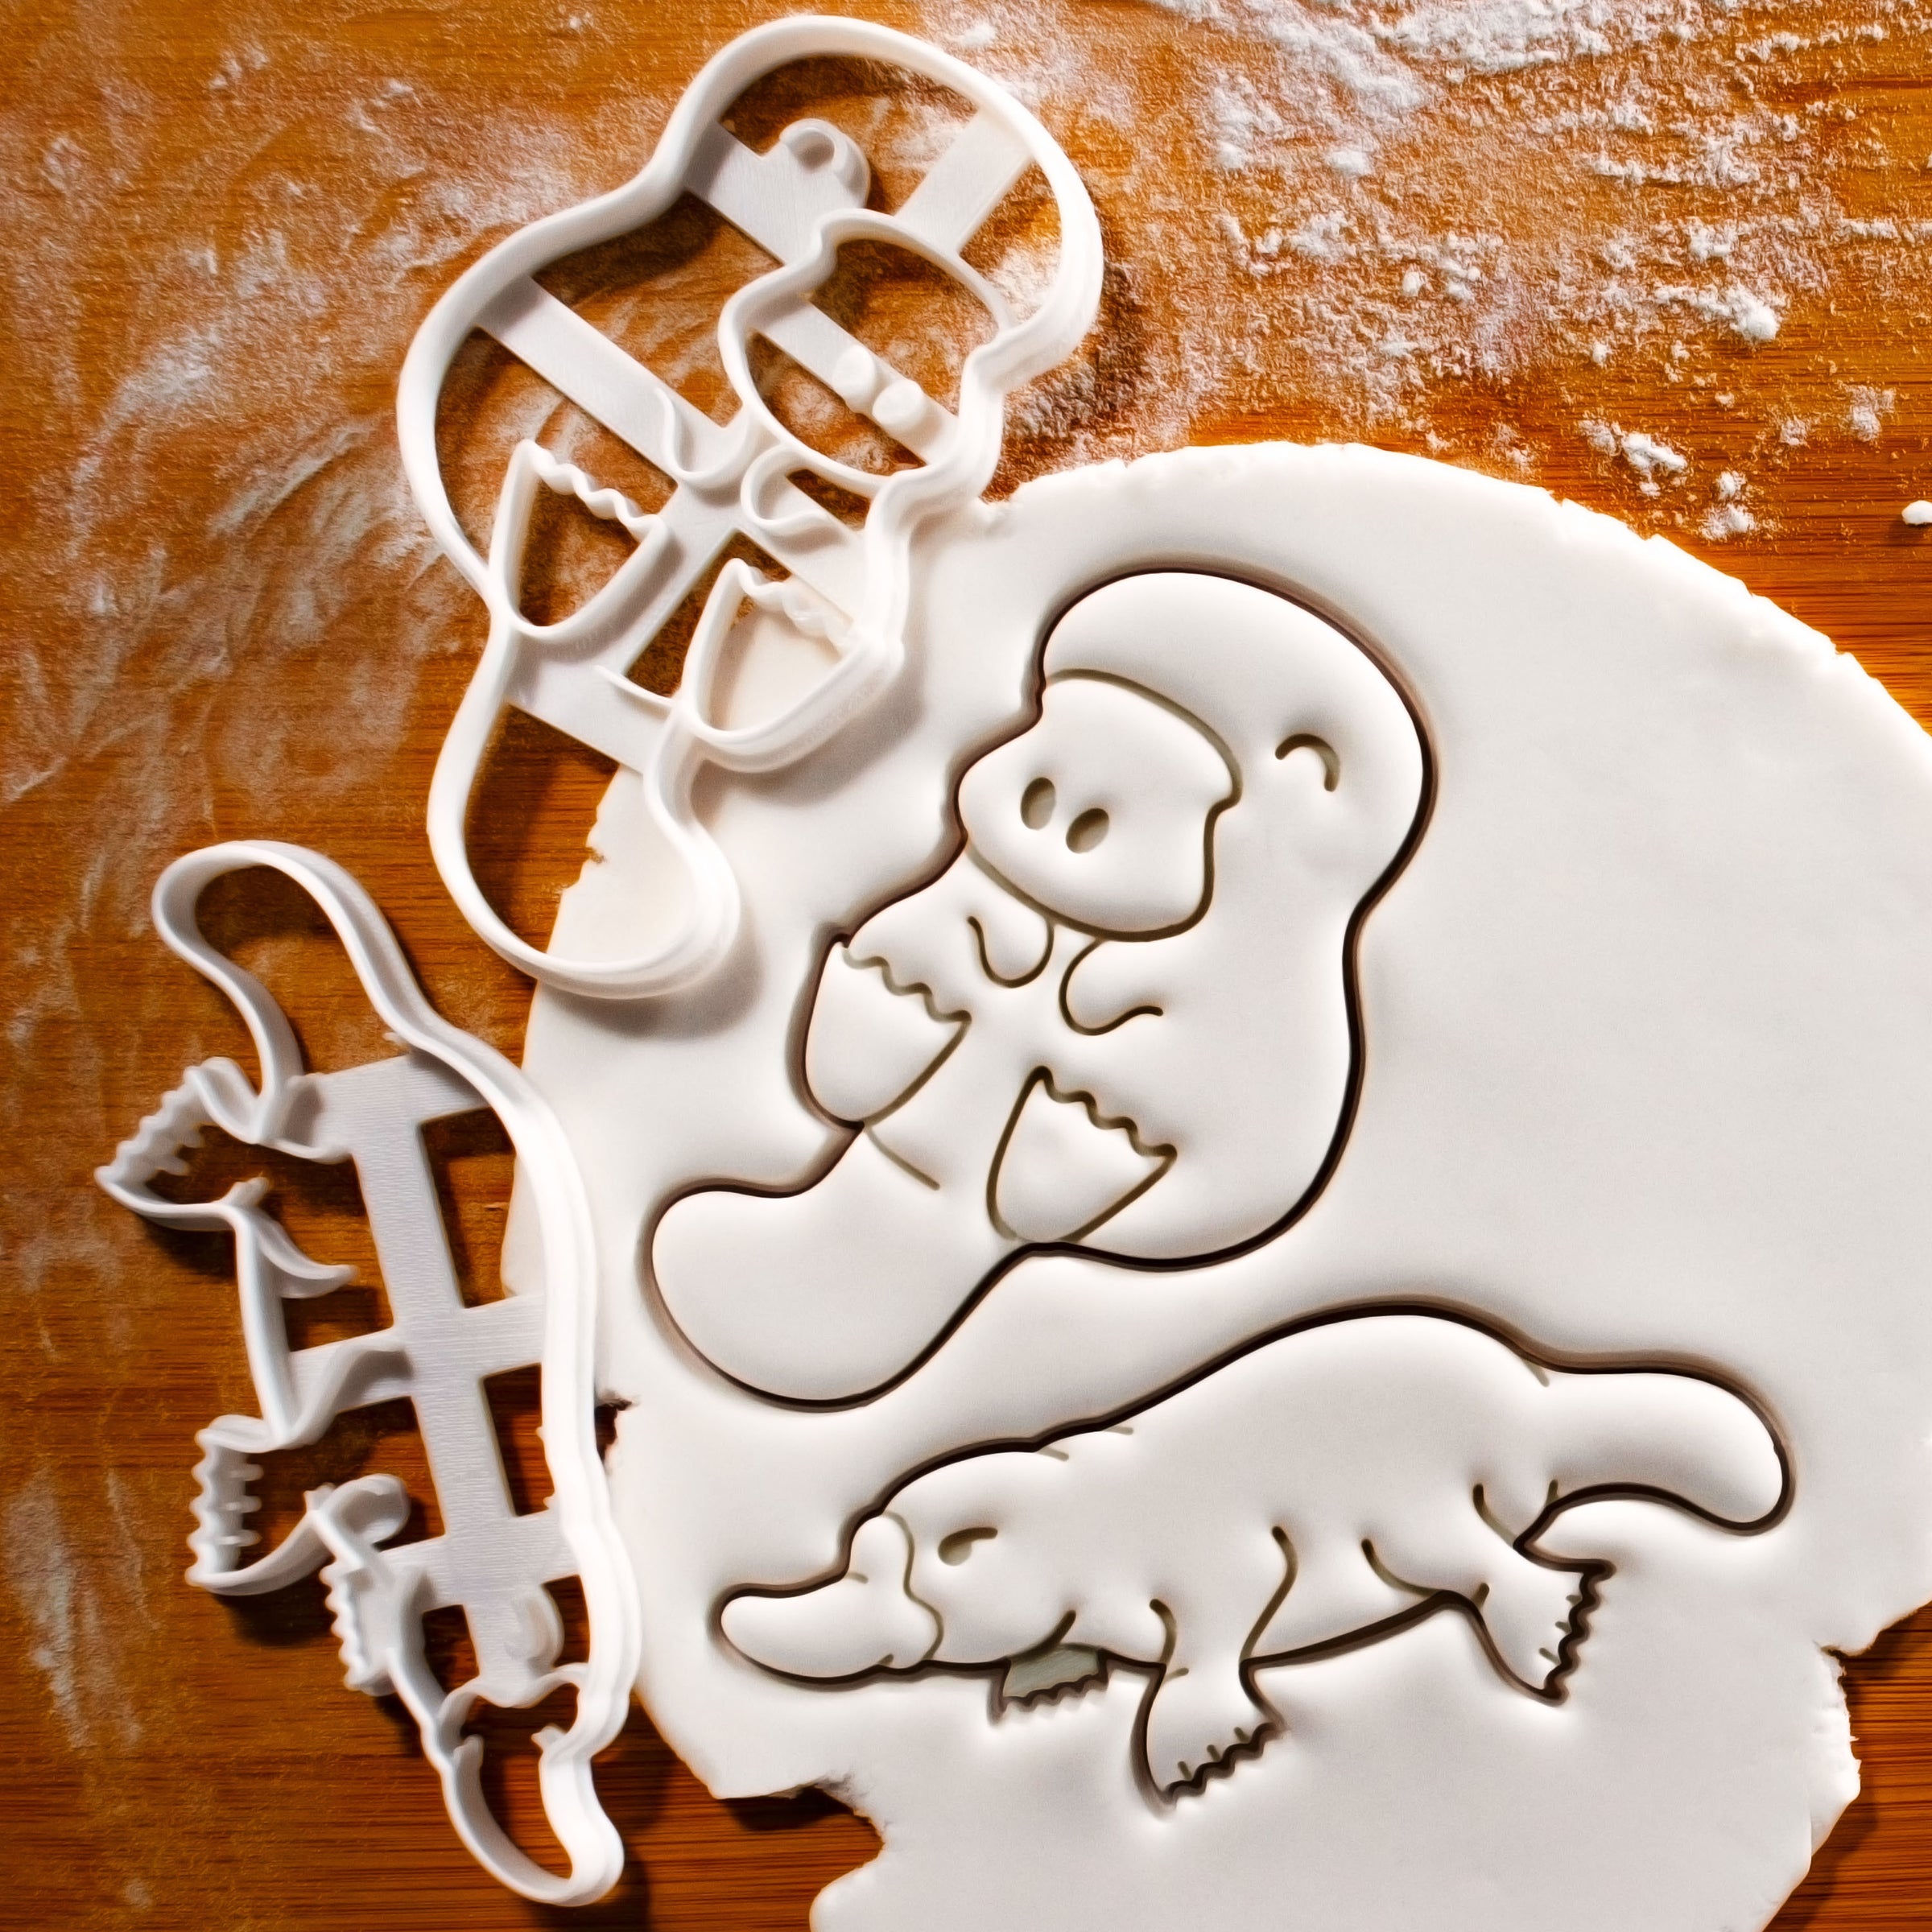 Set of 2 Platypus Cookie Cutters